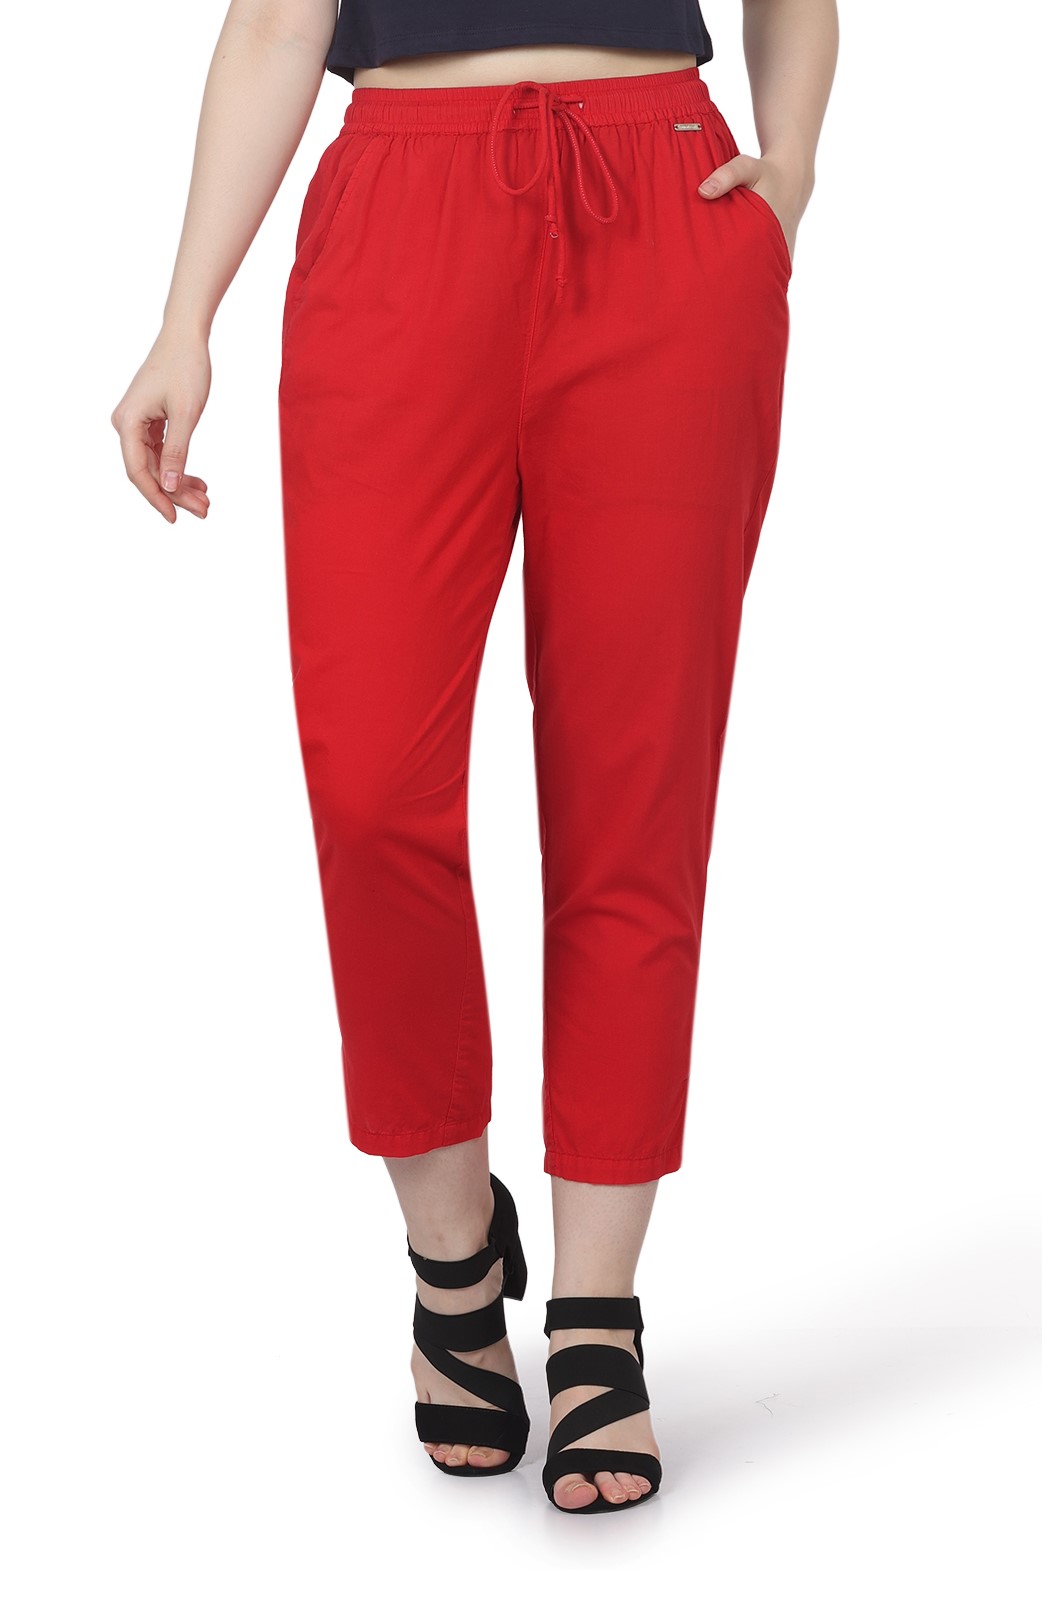 Frenchtrendz  Frenchtrendz Women's Red Cotton Pant Elastic Closure With  Drawstring